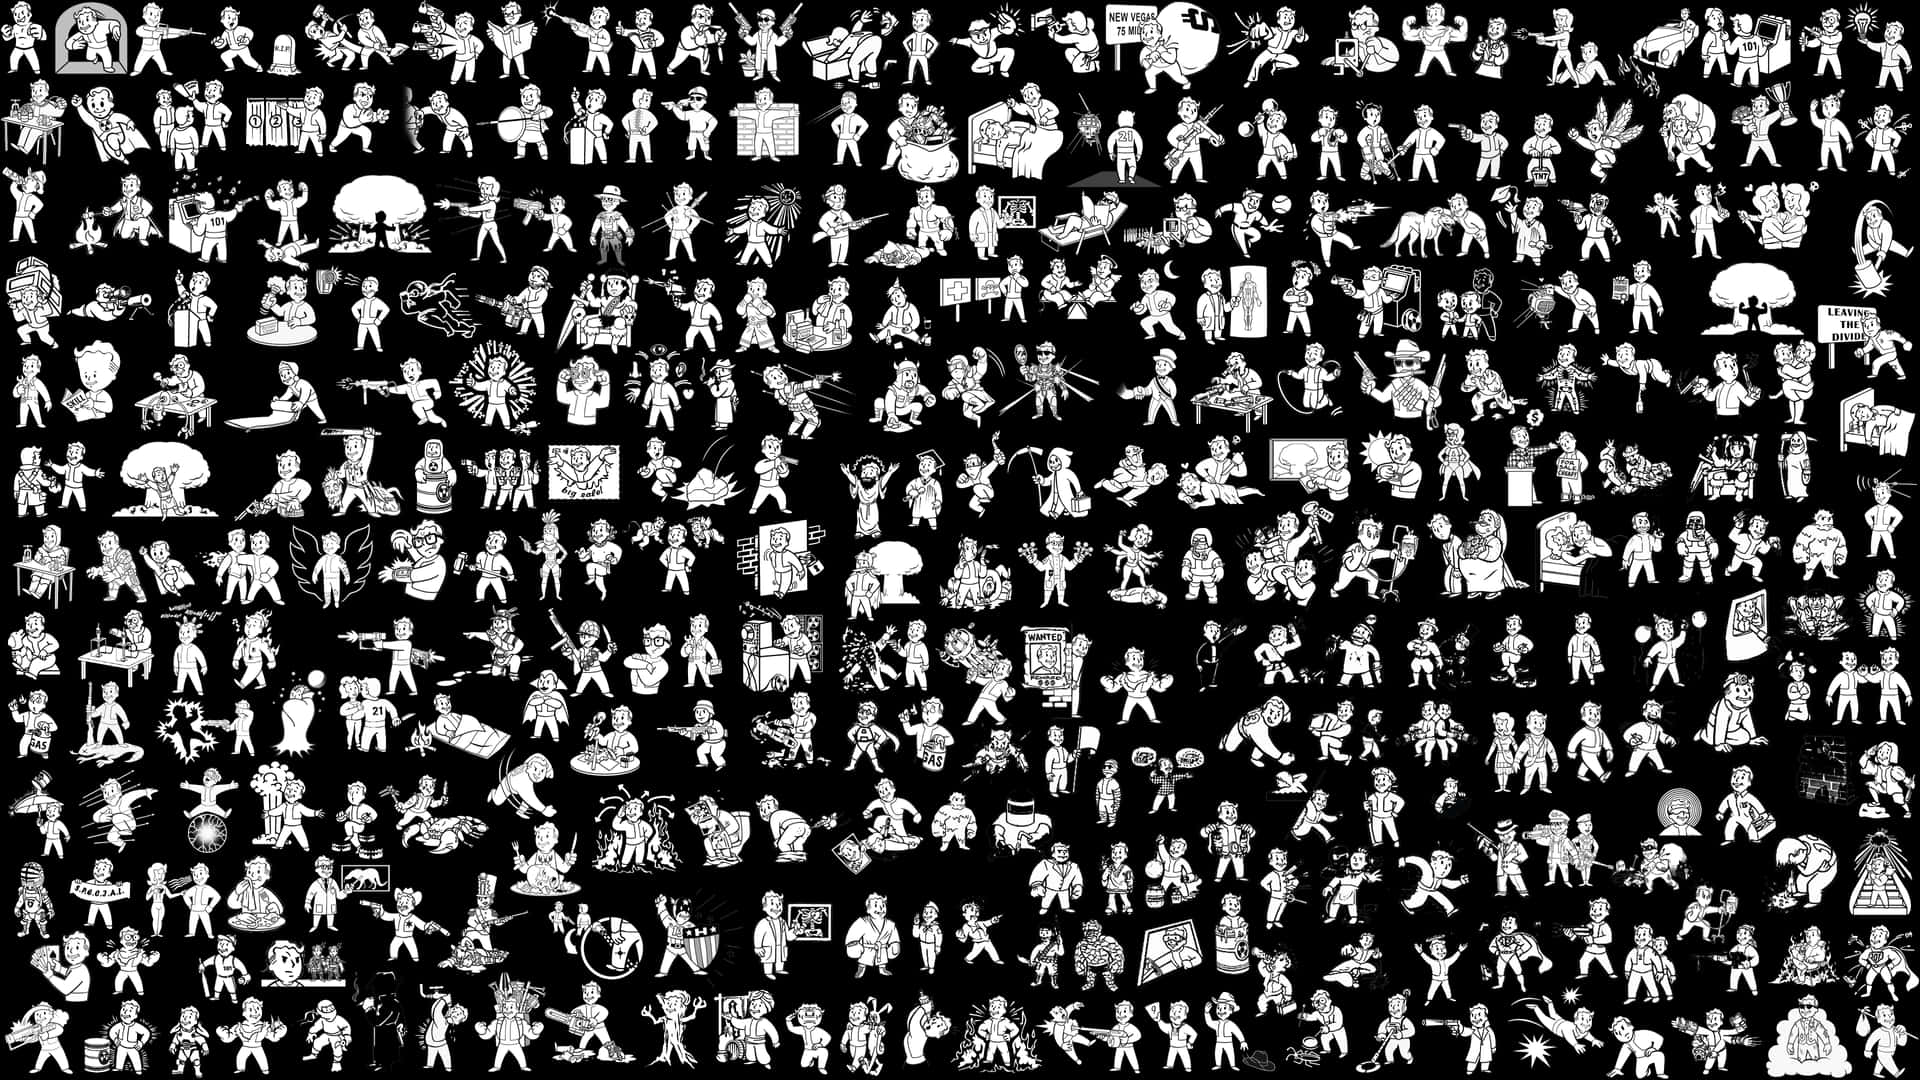 A Black And White Image Of A Large Group Of People Wallpaper